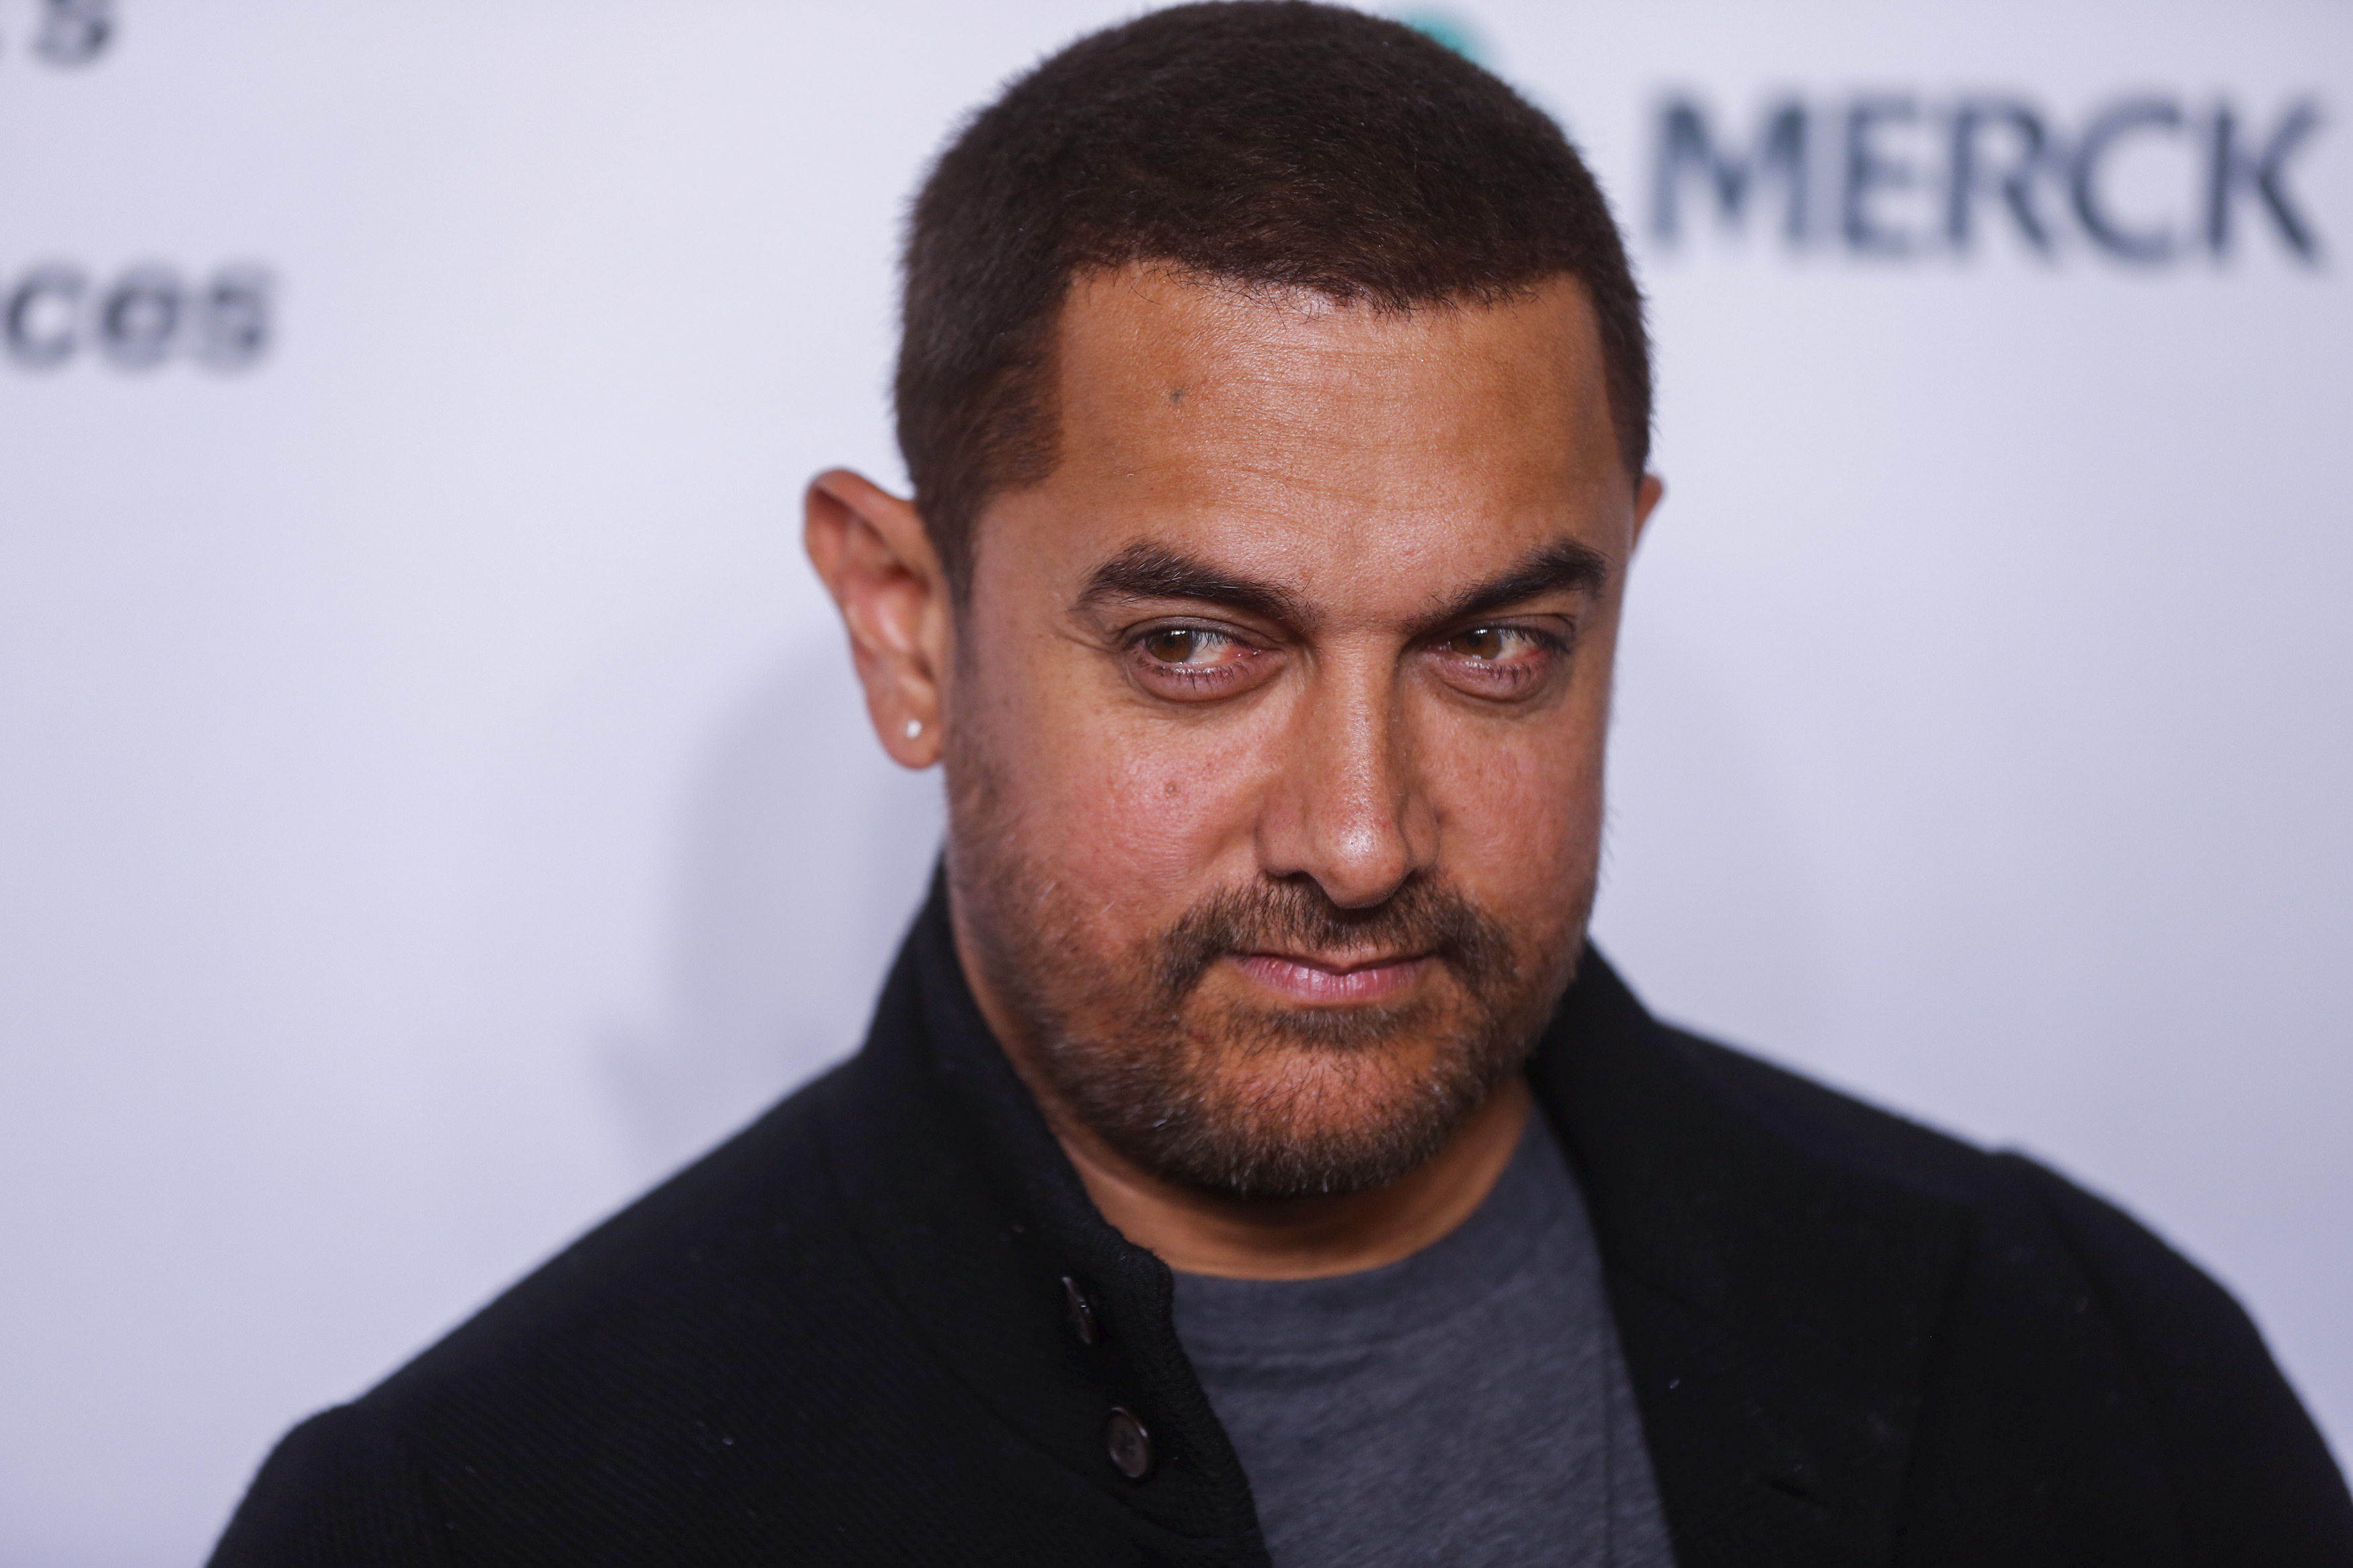 Bollywood Star Aamir Khan Is Under Fire For Complaining About